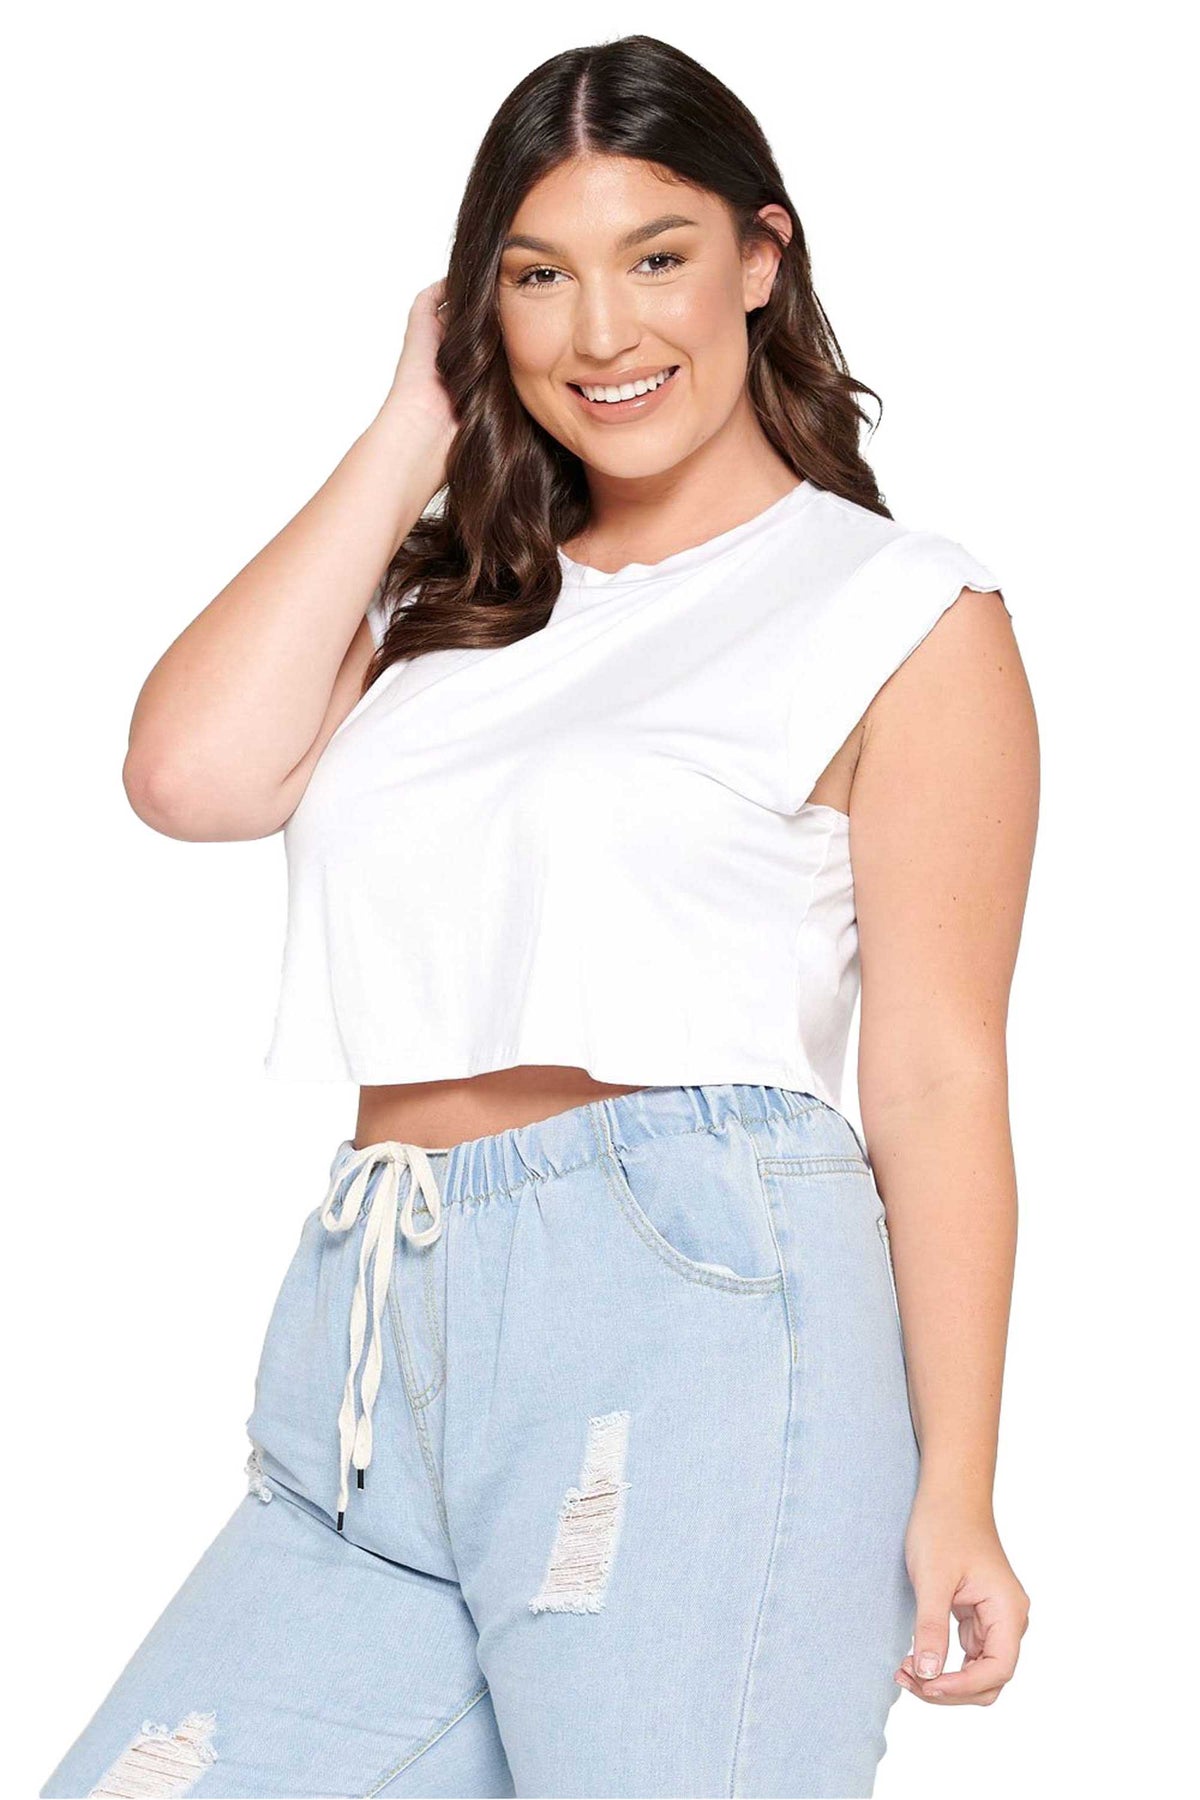 LIVD Apparel chic trendy plus size clothing white loose fitting crop top with mini cap sleeves